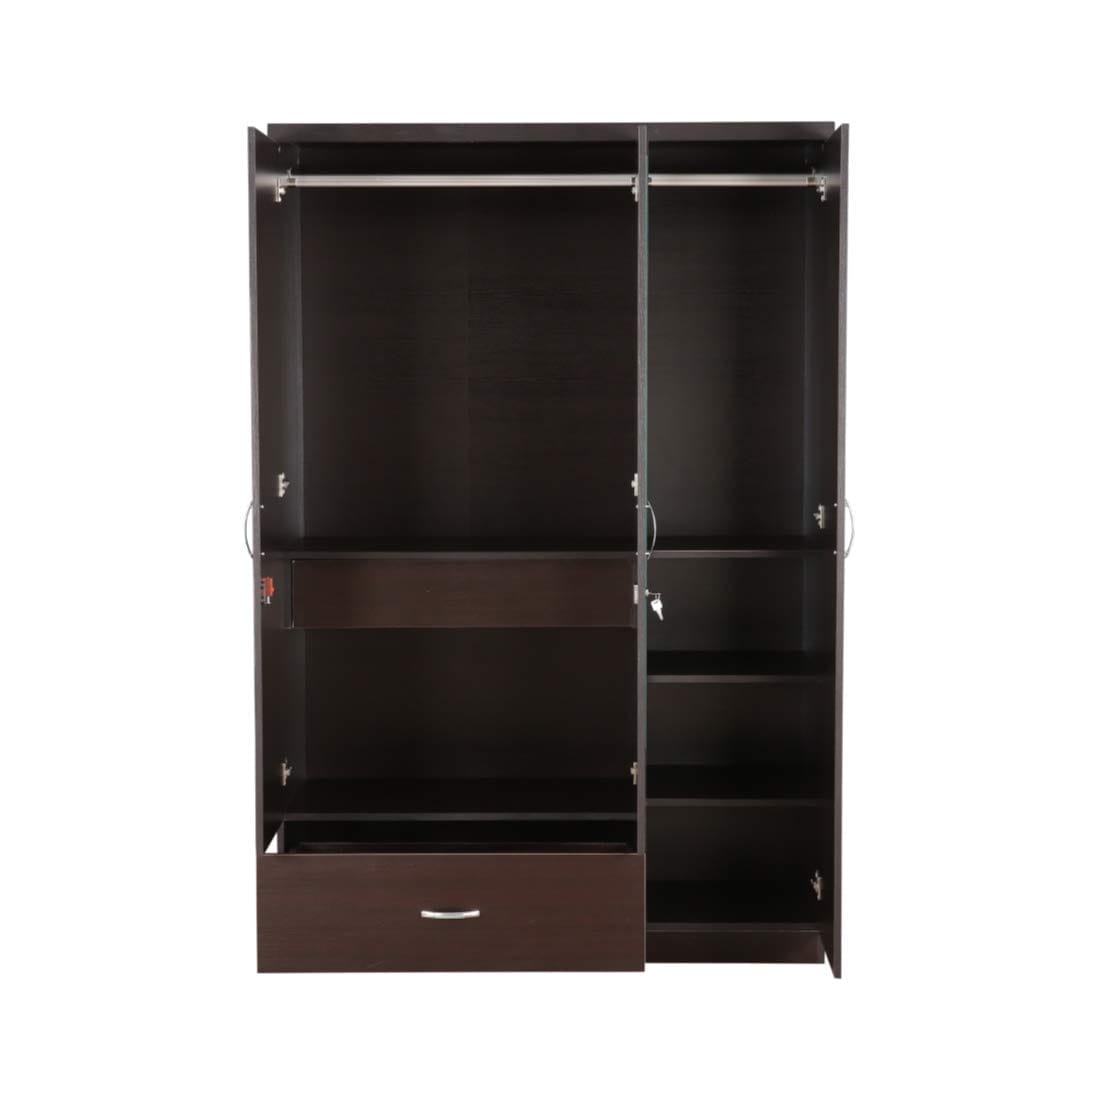 Walnut Colour 3 Door Wardrobe With 2 Drawers , Shelves And Hanging Space For Clothes | Wardrobe For Clothes